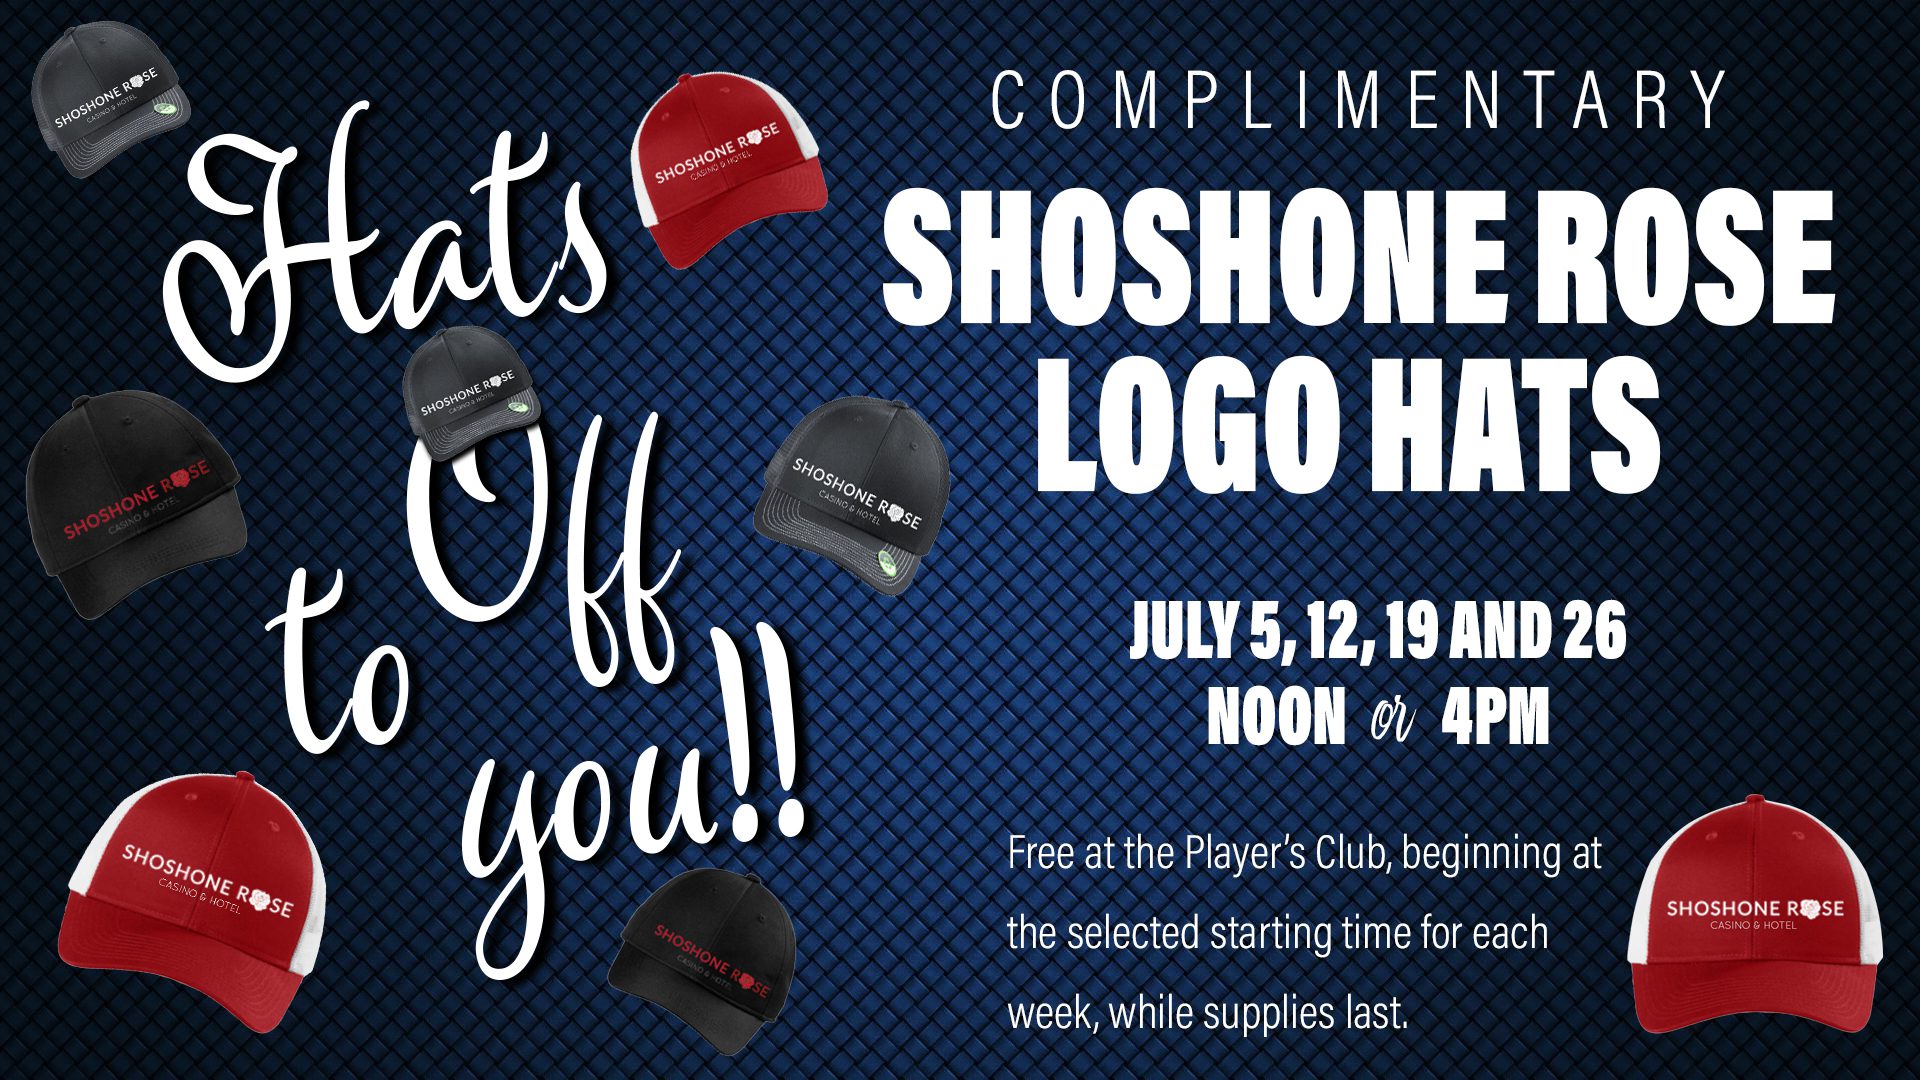 Promotional advertisement for complimentary shoshone rose logo hats available on select dates and times.